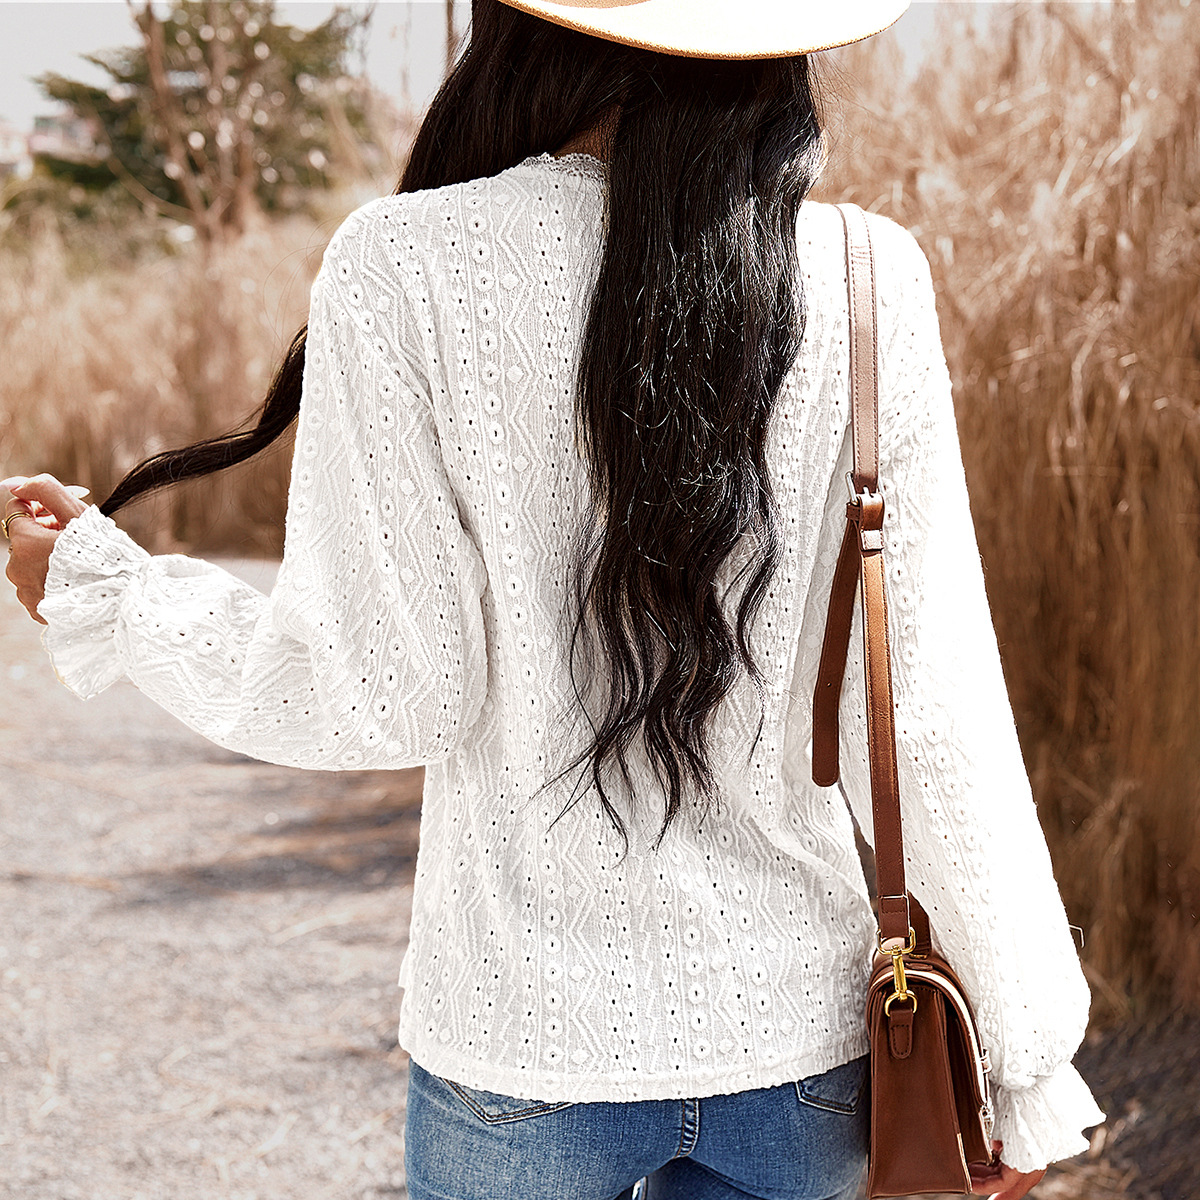 Lace autumn and winter European style long sleeve tops